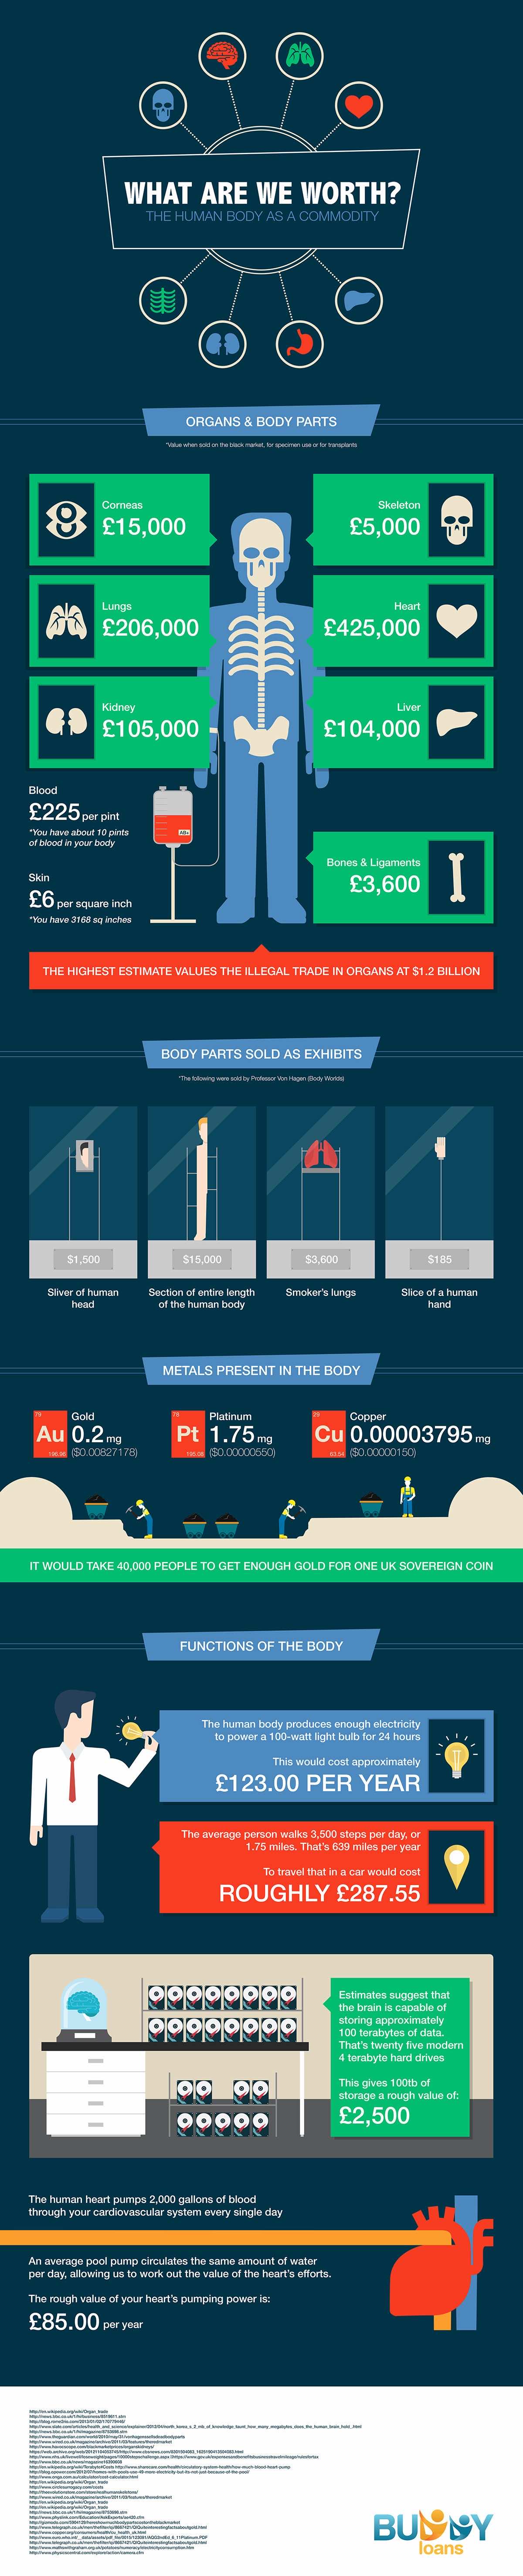 This Is How Much A Human Body Is Worth In The Market